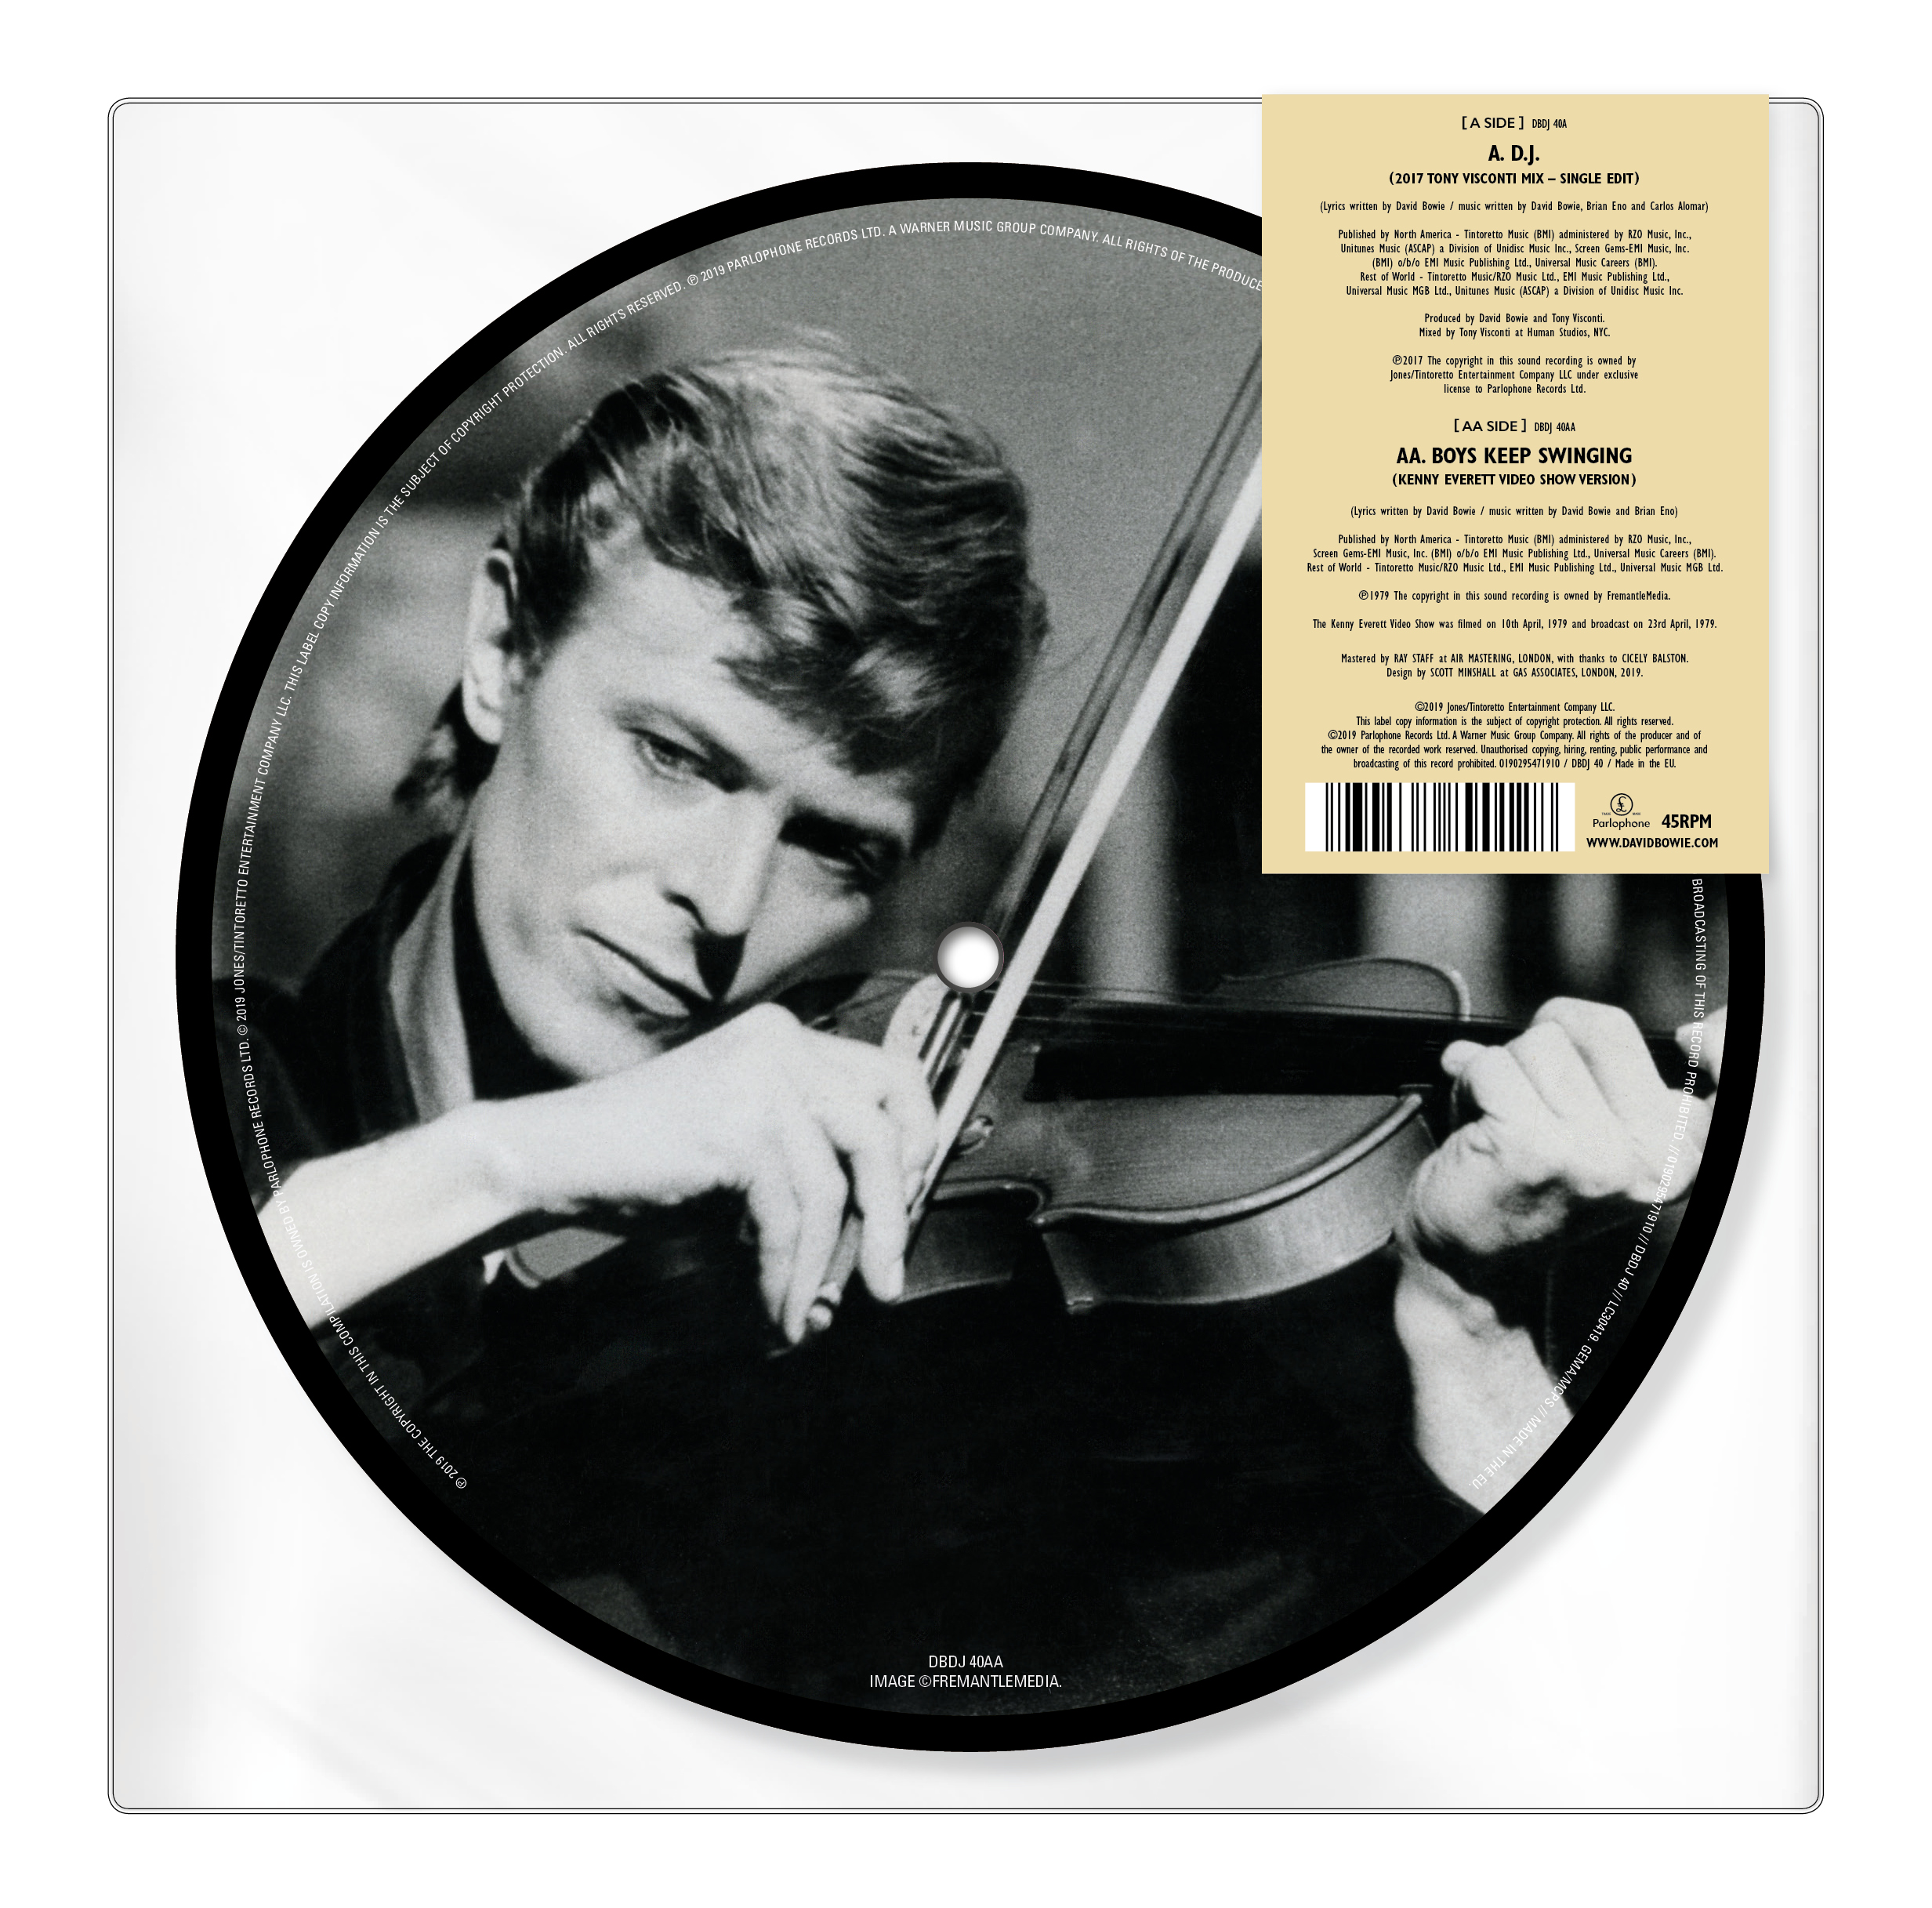 D.J. Limited Edition 40th Anniversary 7 Picture Disc